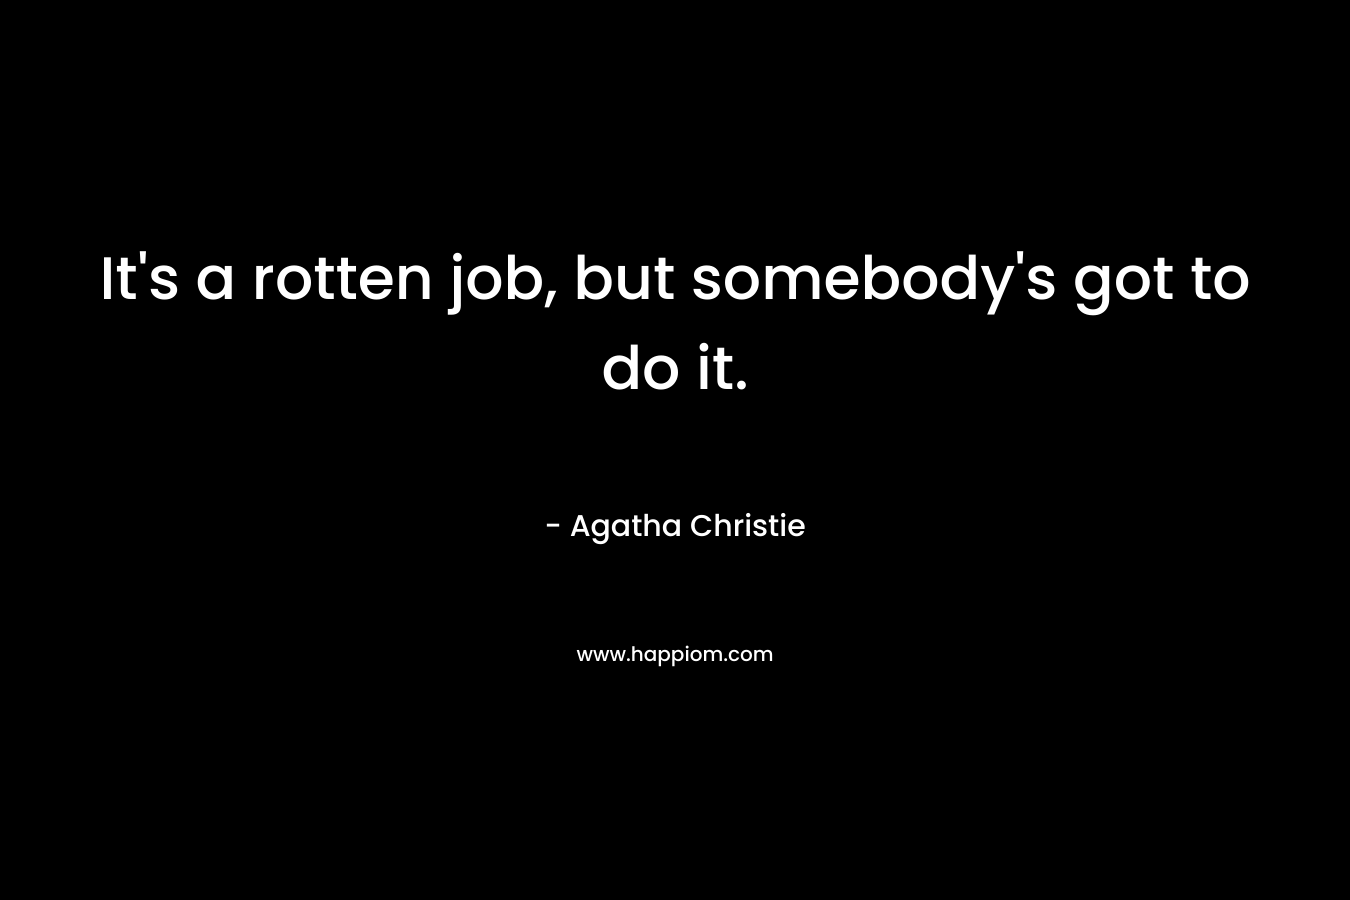 It’s a rotten job, but somebody’s got to do it. – Agatha Christie